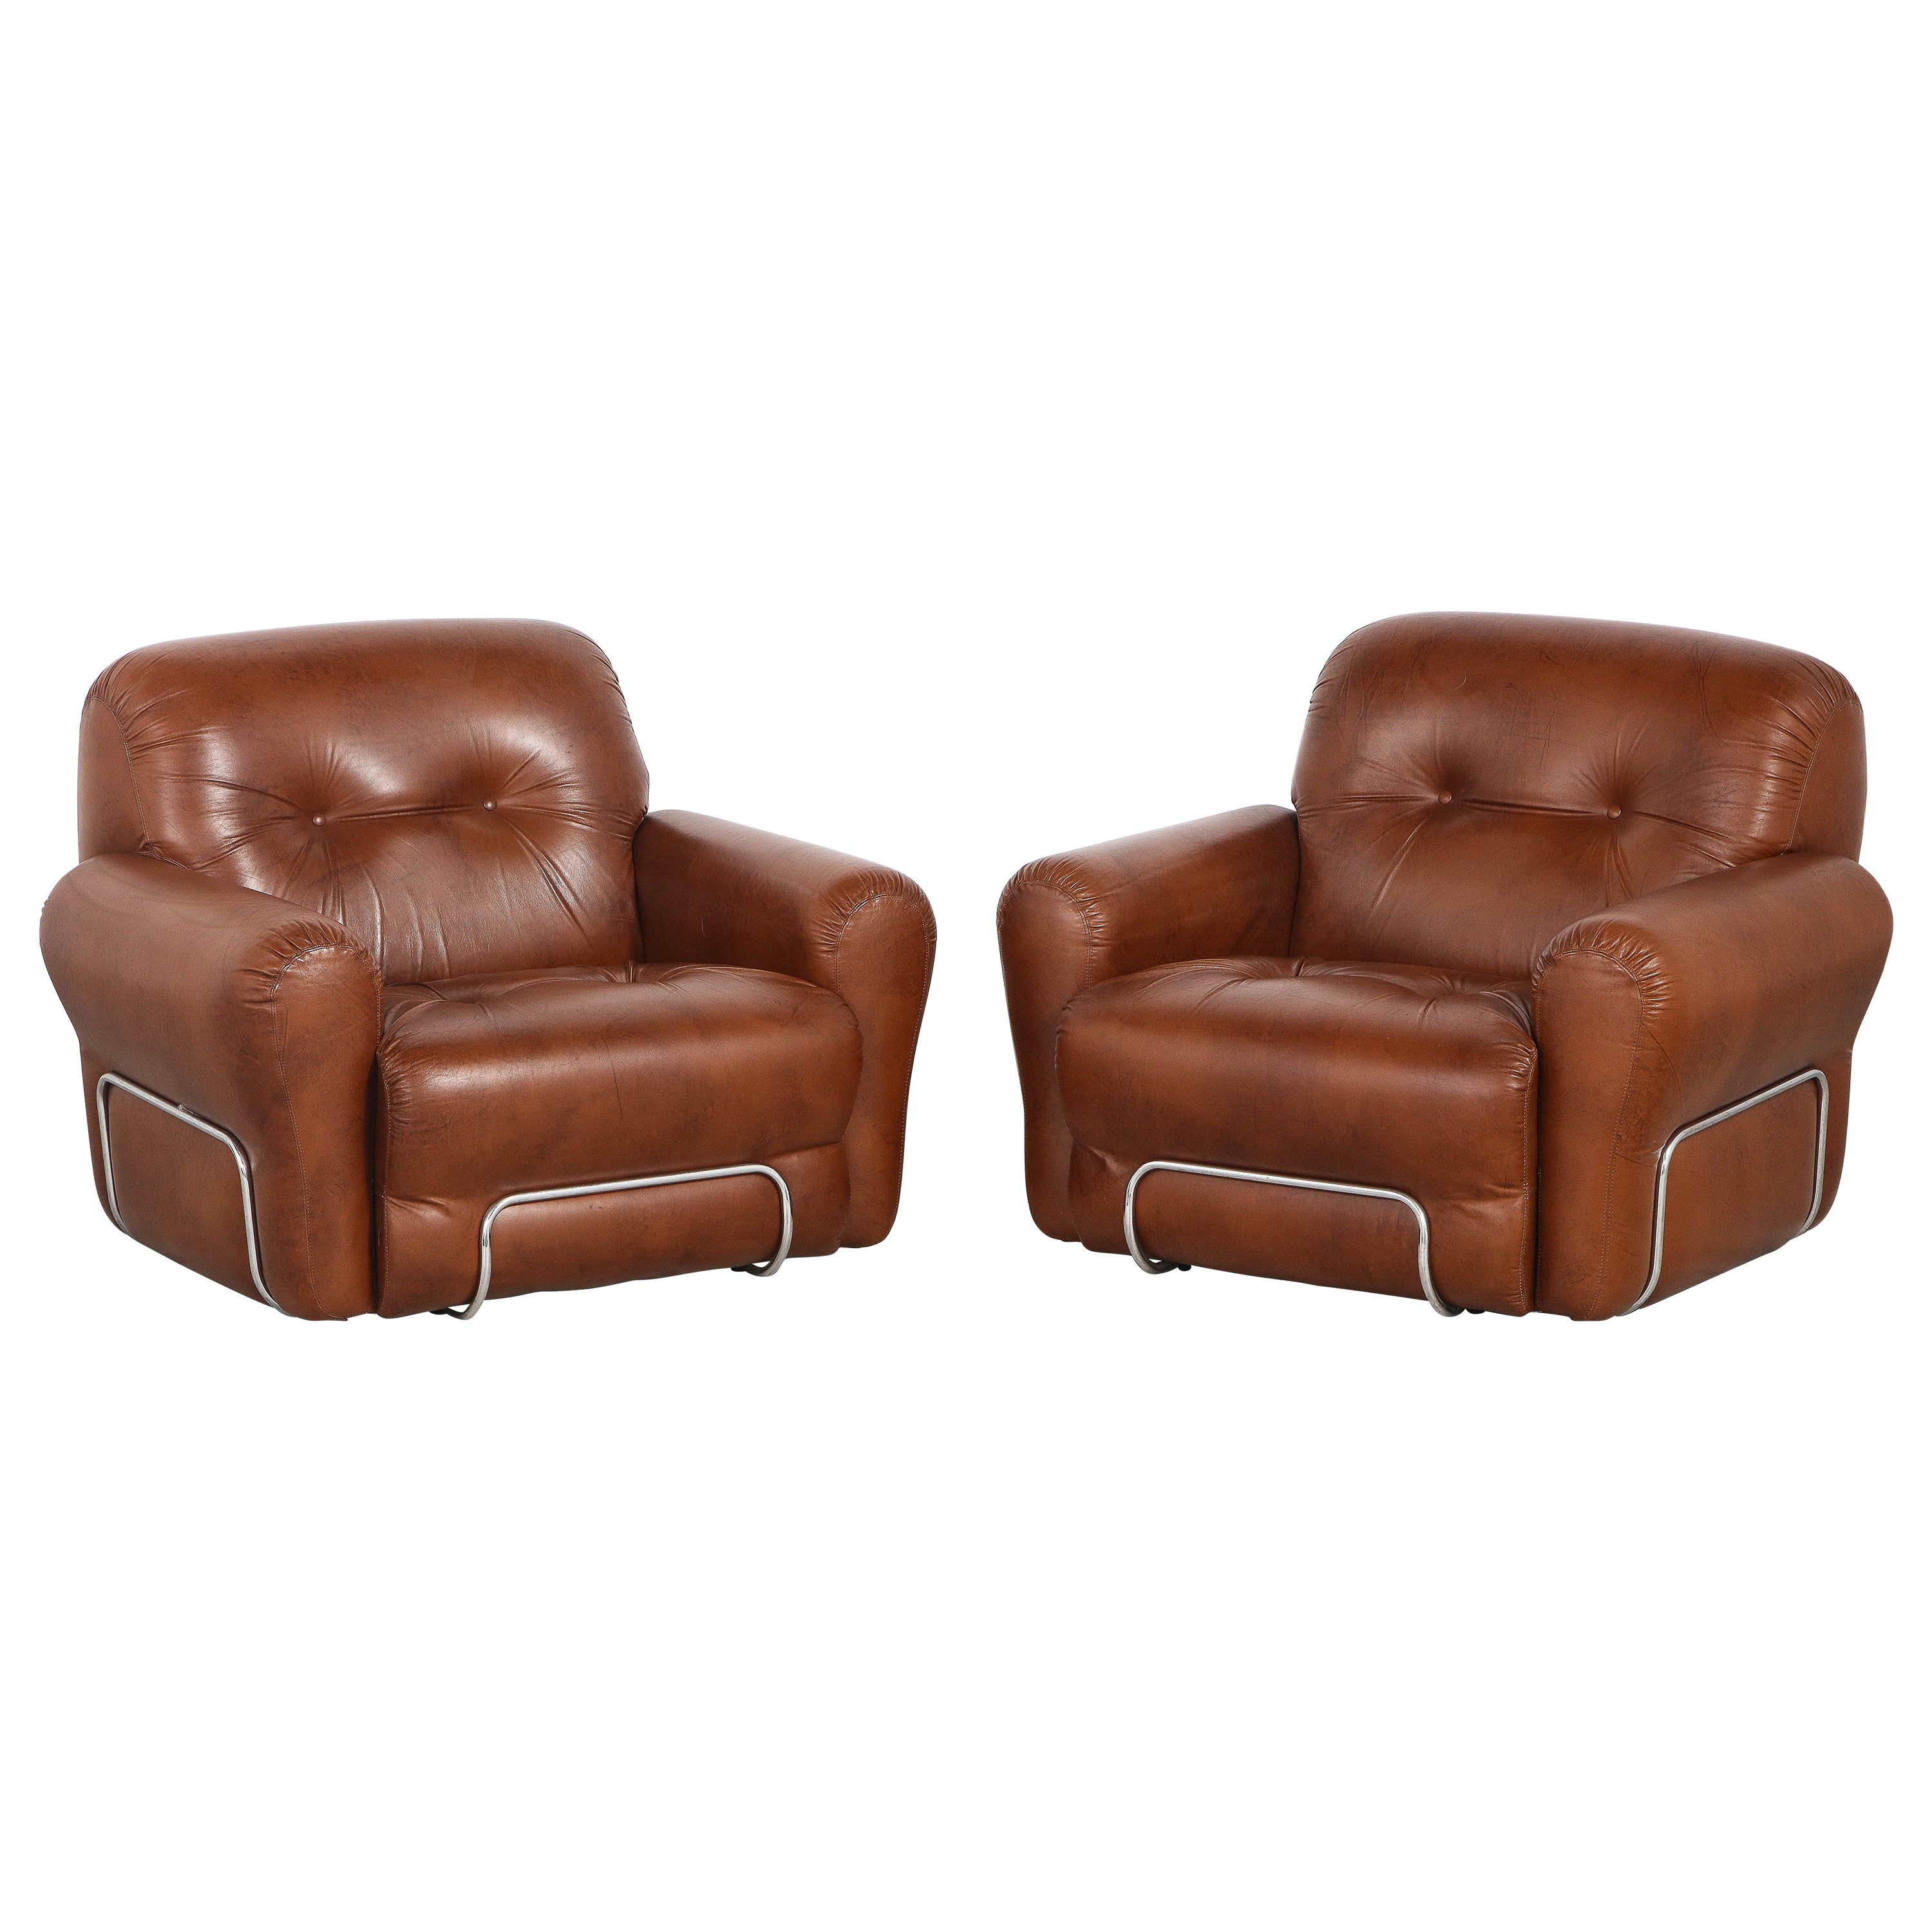 Pair of Adriano Piazzessi Italian 1970's Leather Tufted Lounge Chairs 